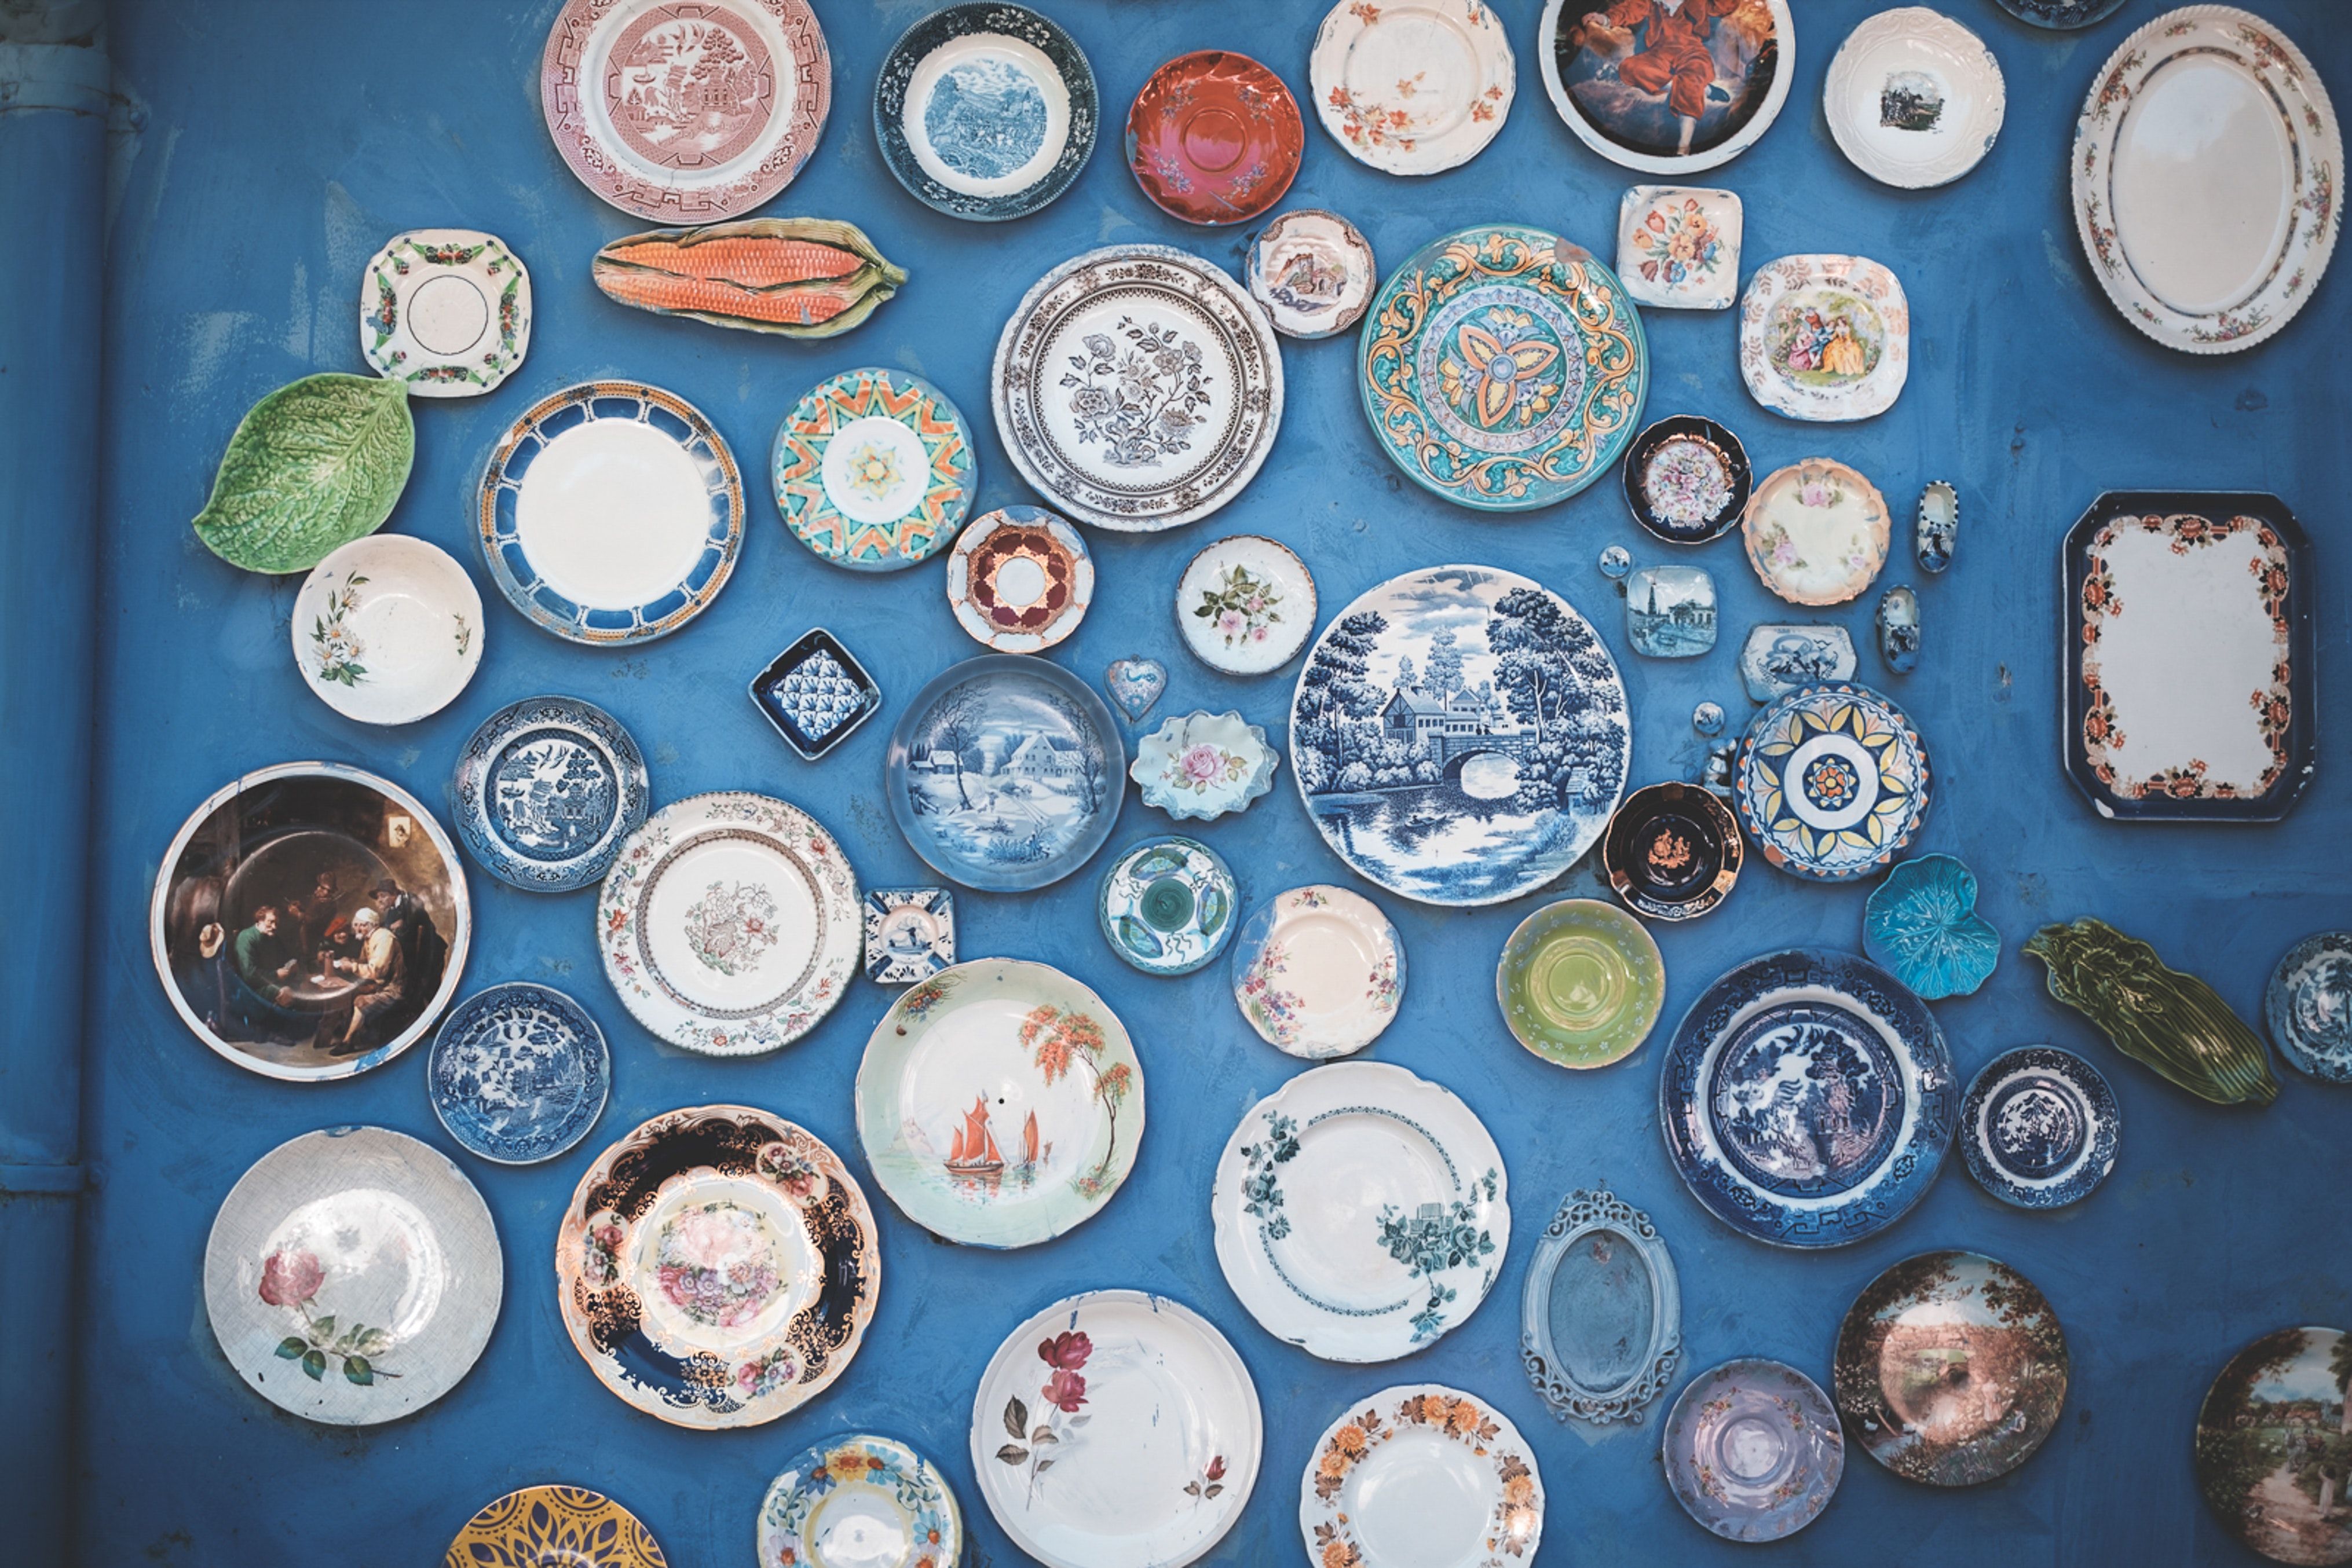 Various antique plates on a blue background